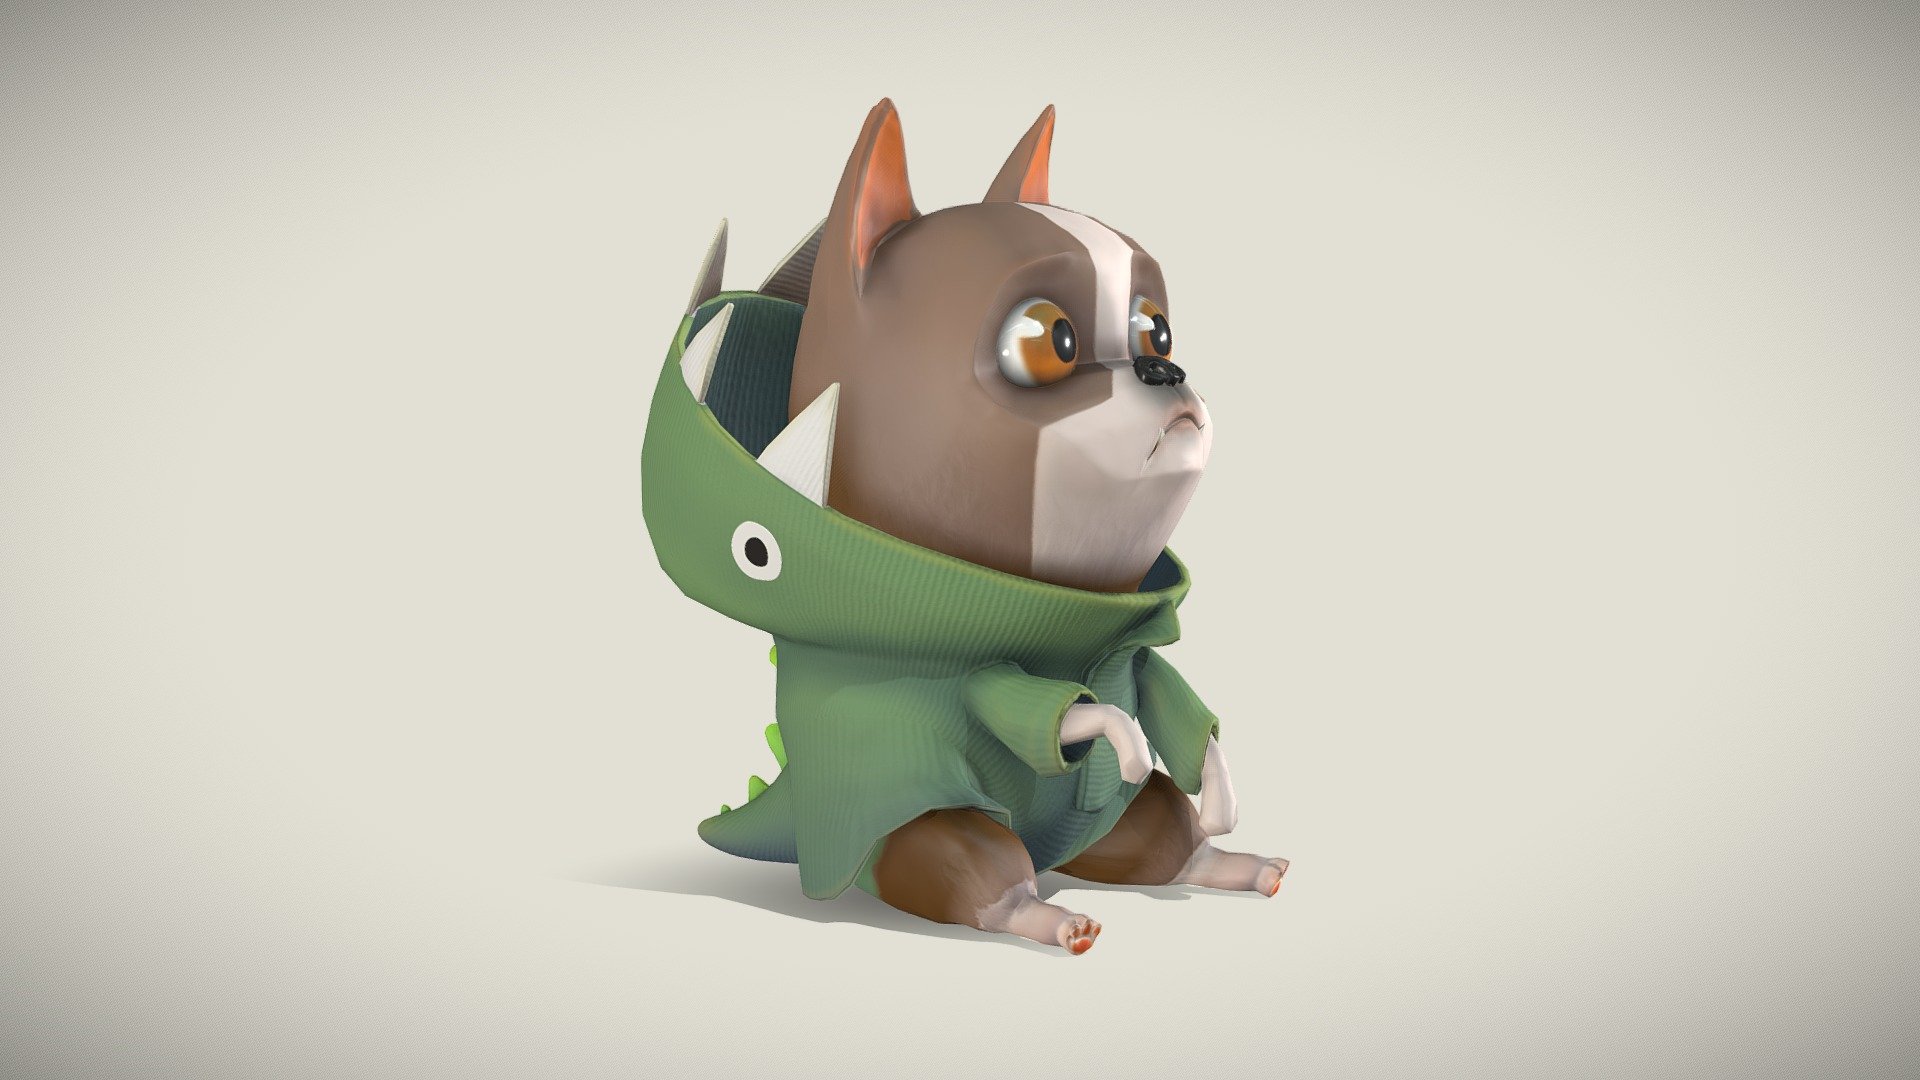 For the course Stylised Creation at Howest DAE I made this cute dog. This assignment was focussed on going through the whole pipeline (blockout - sculpting - retopology - UV Layout - texturing - presentation). This little guy was sculpted in ZBrush, retopo and UVs were done in Maya and I used Substance Painter for the final texturing touches.

This character was made out of a concept by Lynn Chen. The link to ArtStation can be found here: https://www.artstation.com/artwork/kJ4W0

Hope you all like it! - Cute Dog - Stylised Creation Assignment - 3D model by EgonW 3d model